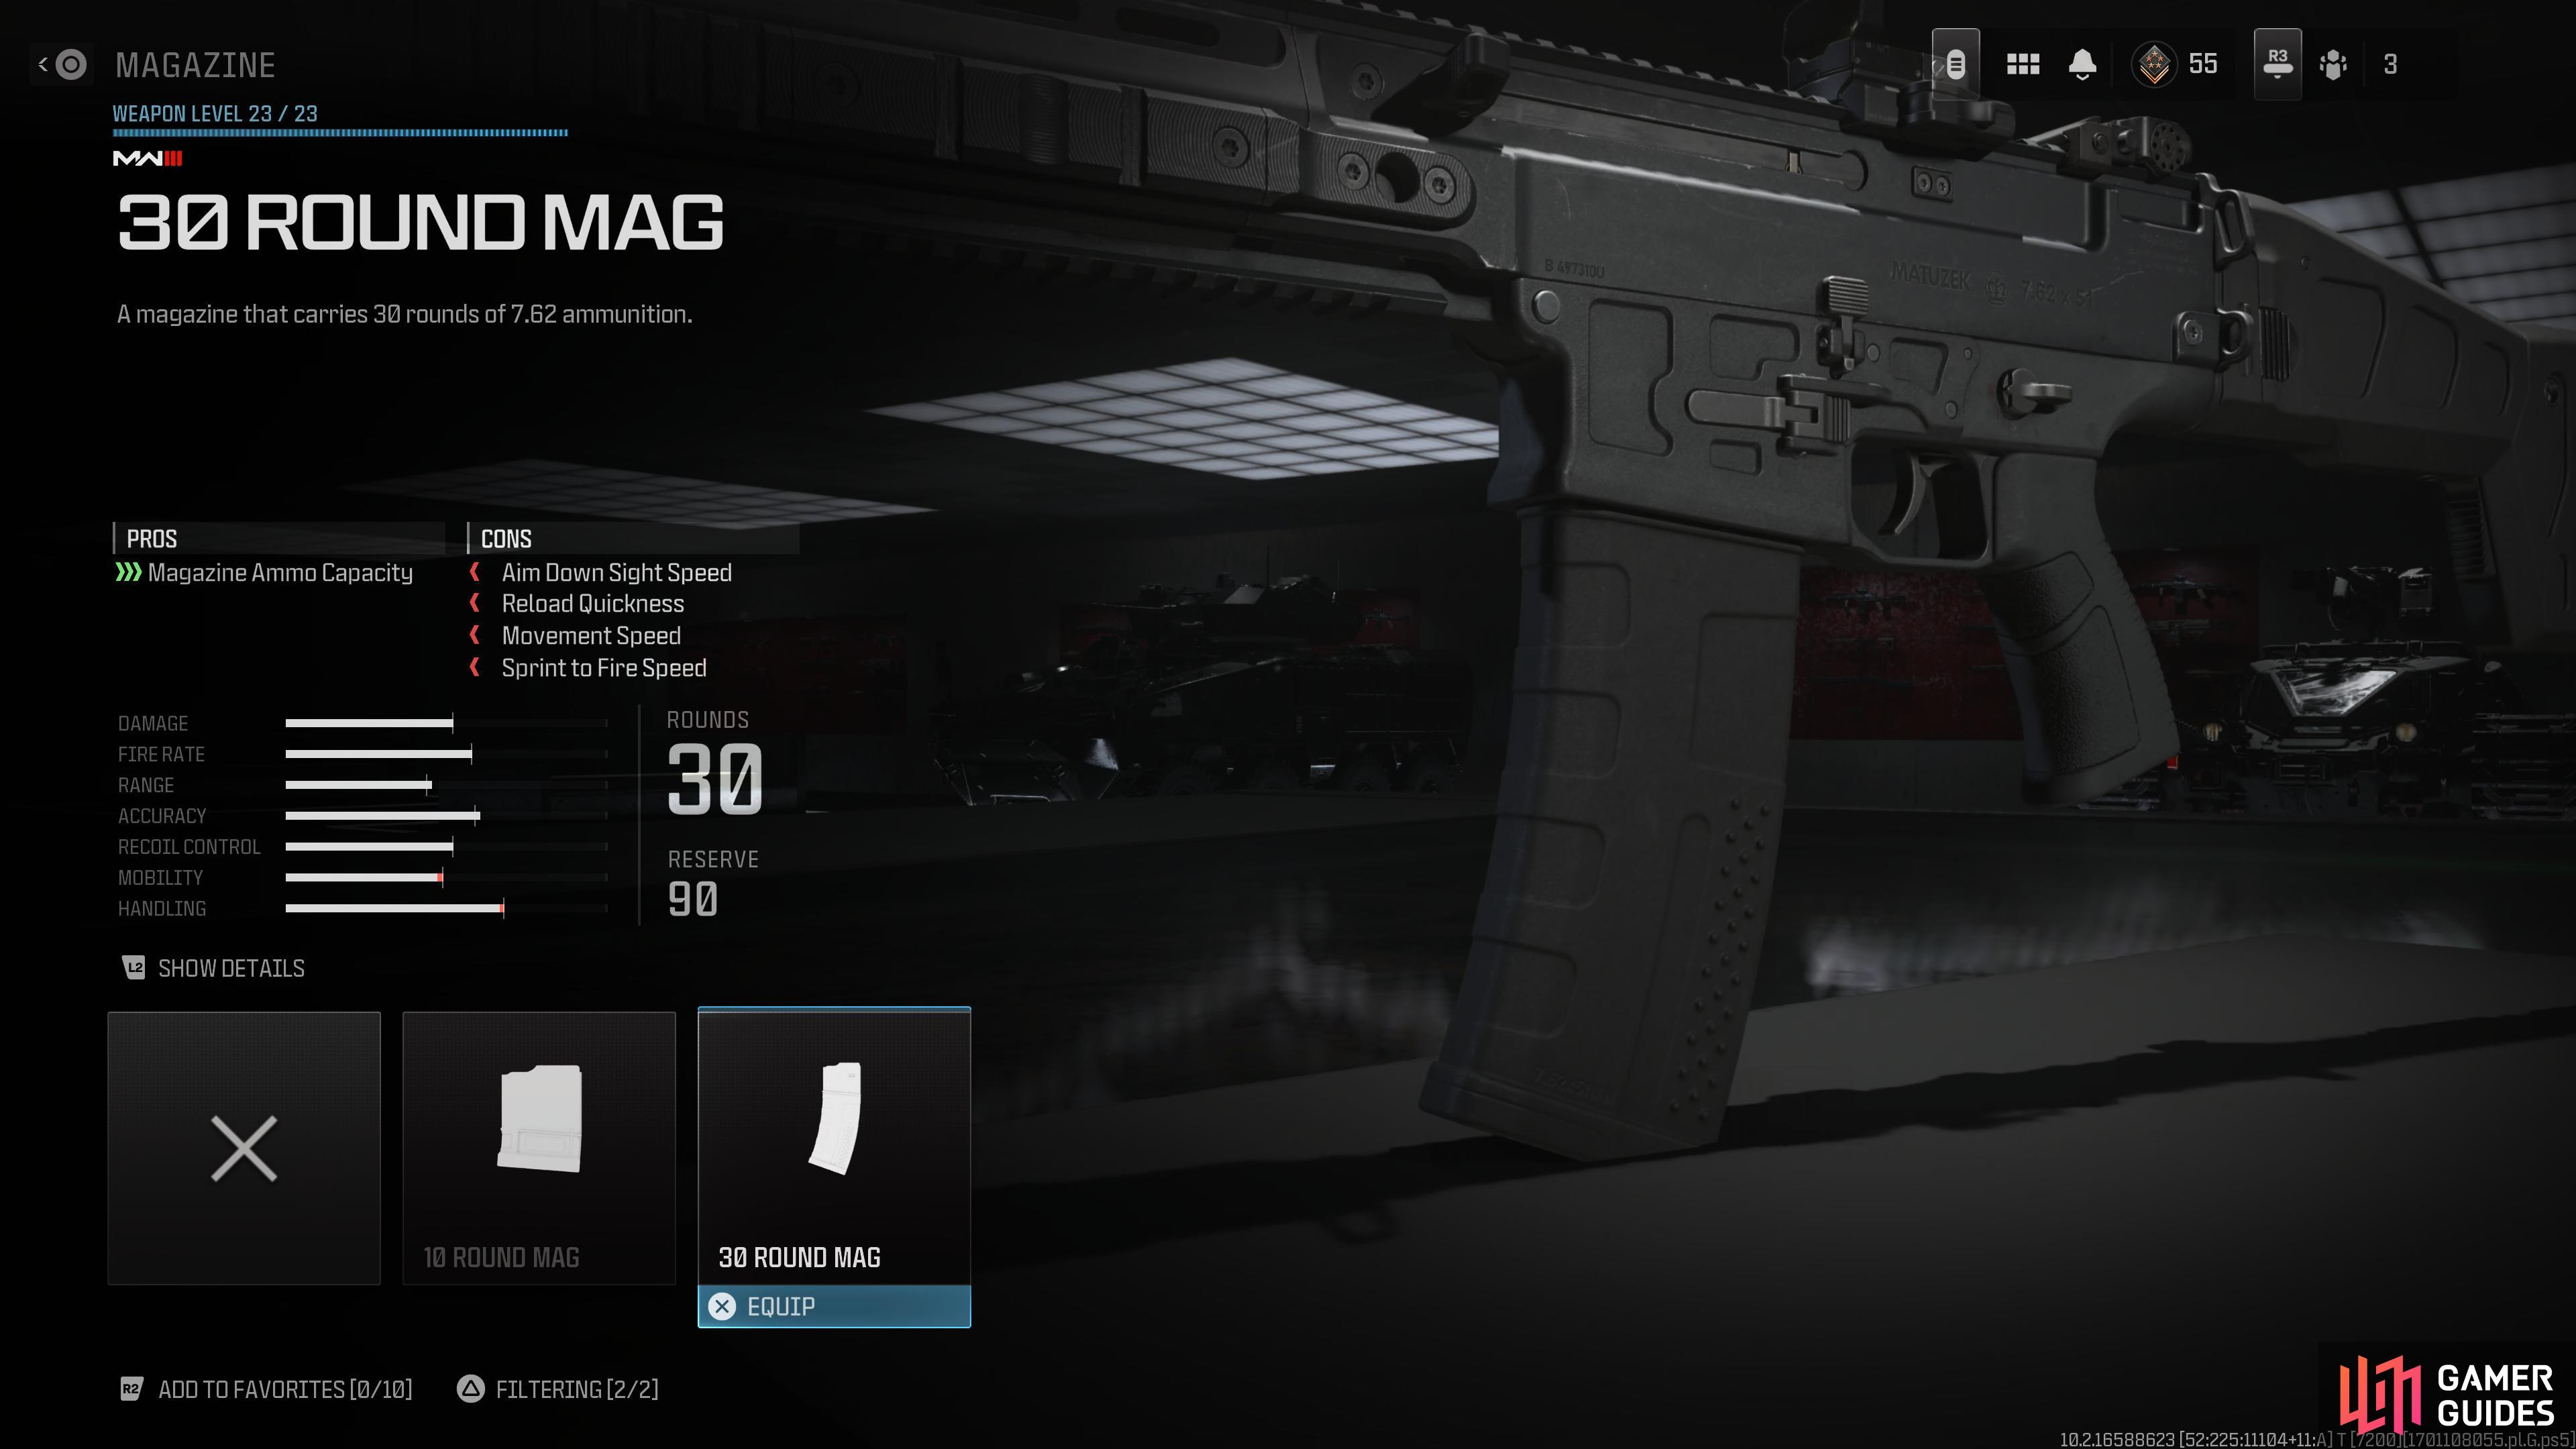 Equip the 30-Round Mag for the kills in a single magazine challenge